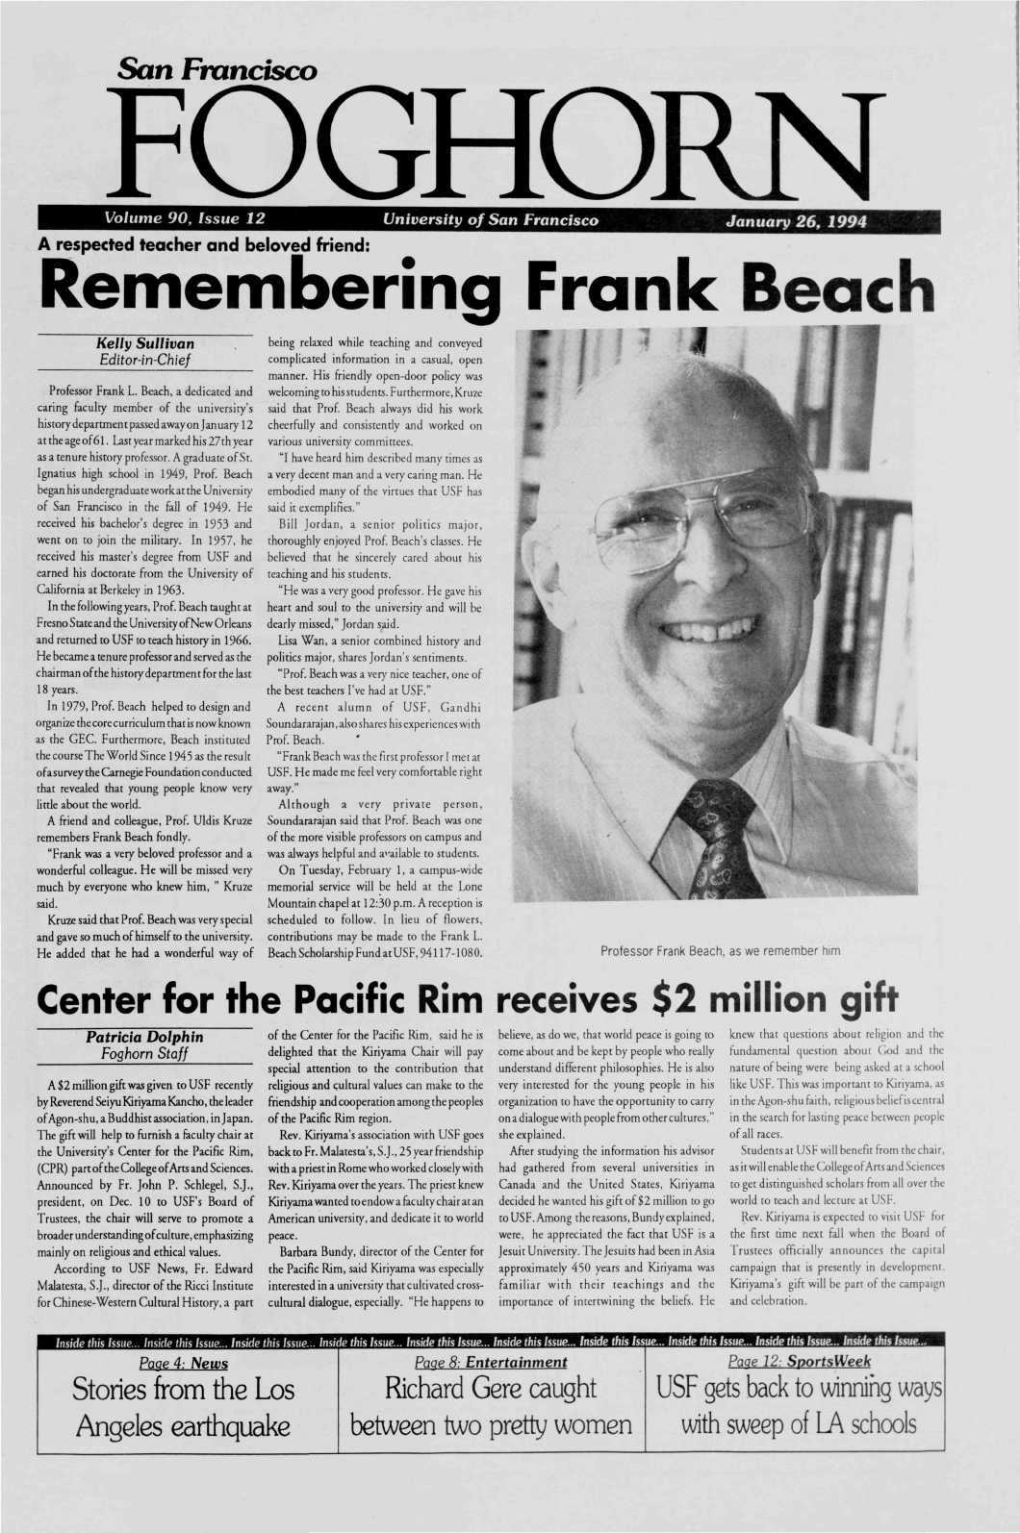 Remembering Frank Beach Kelly Sullivan Being Relaxed While Teaching and Conveyed Editor-In-Chief Complicated Information in a Casual, Open Manner